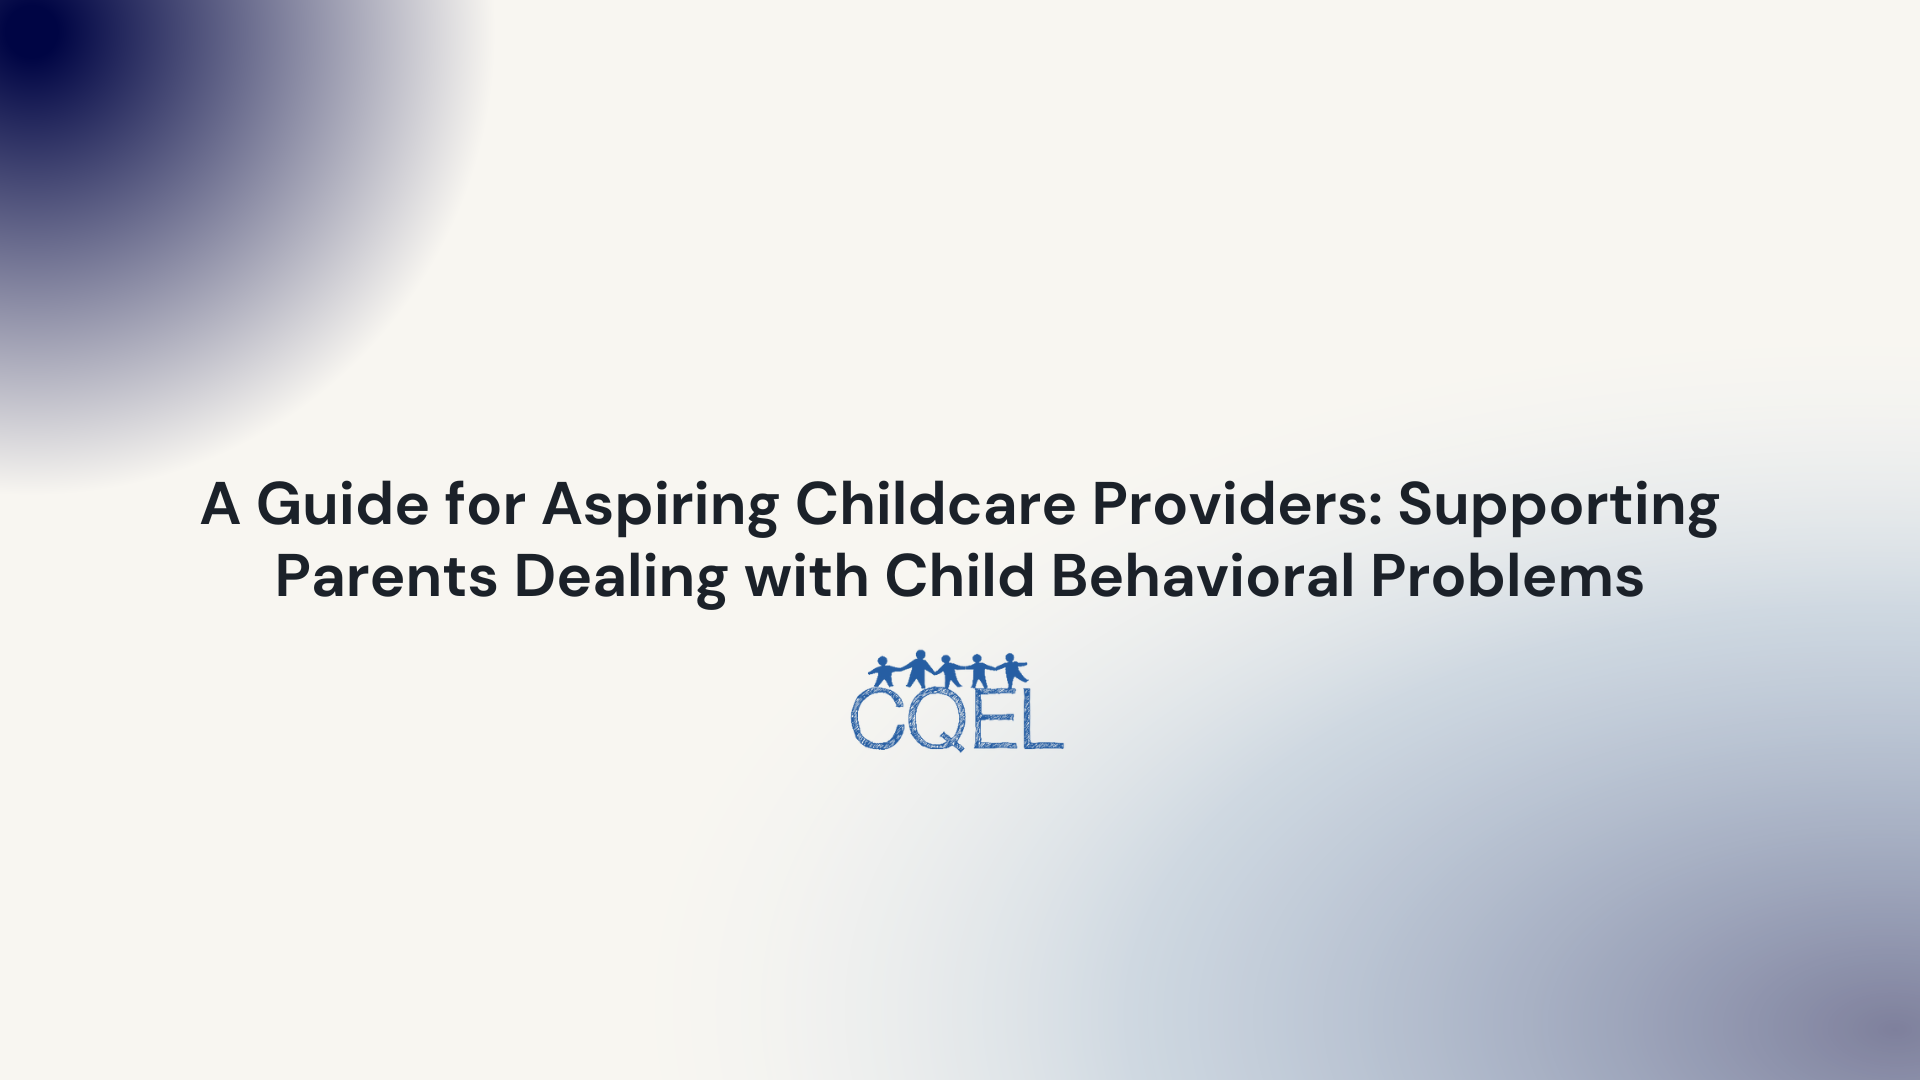 A Guide for Aspiring Childcare Providers: Supporting Parents Dealing with Child Behavioral Problems